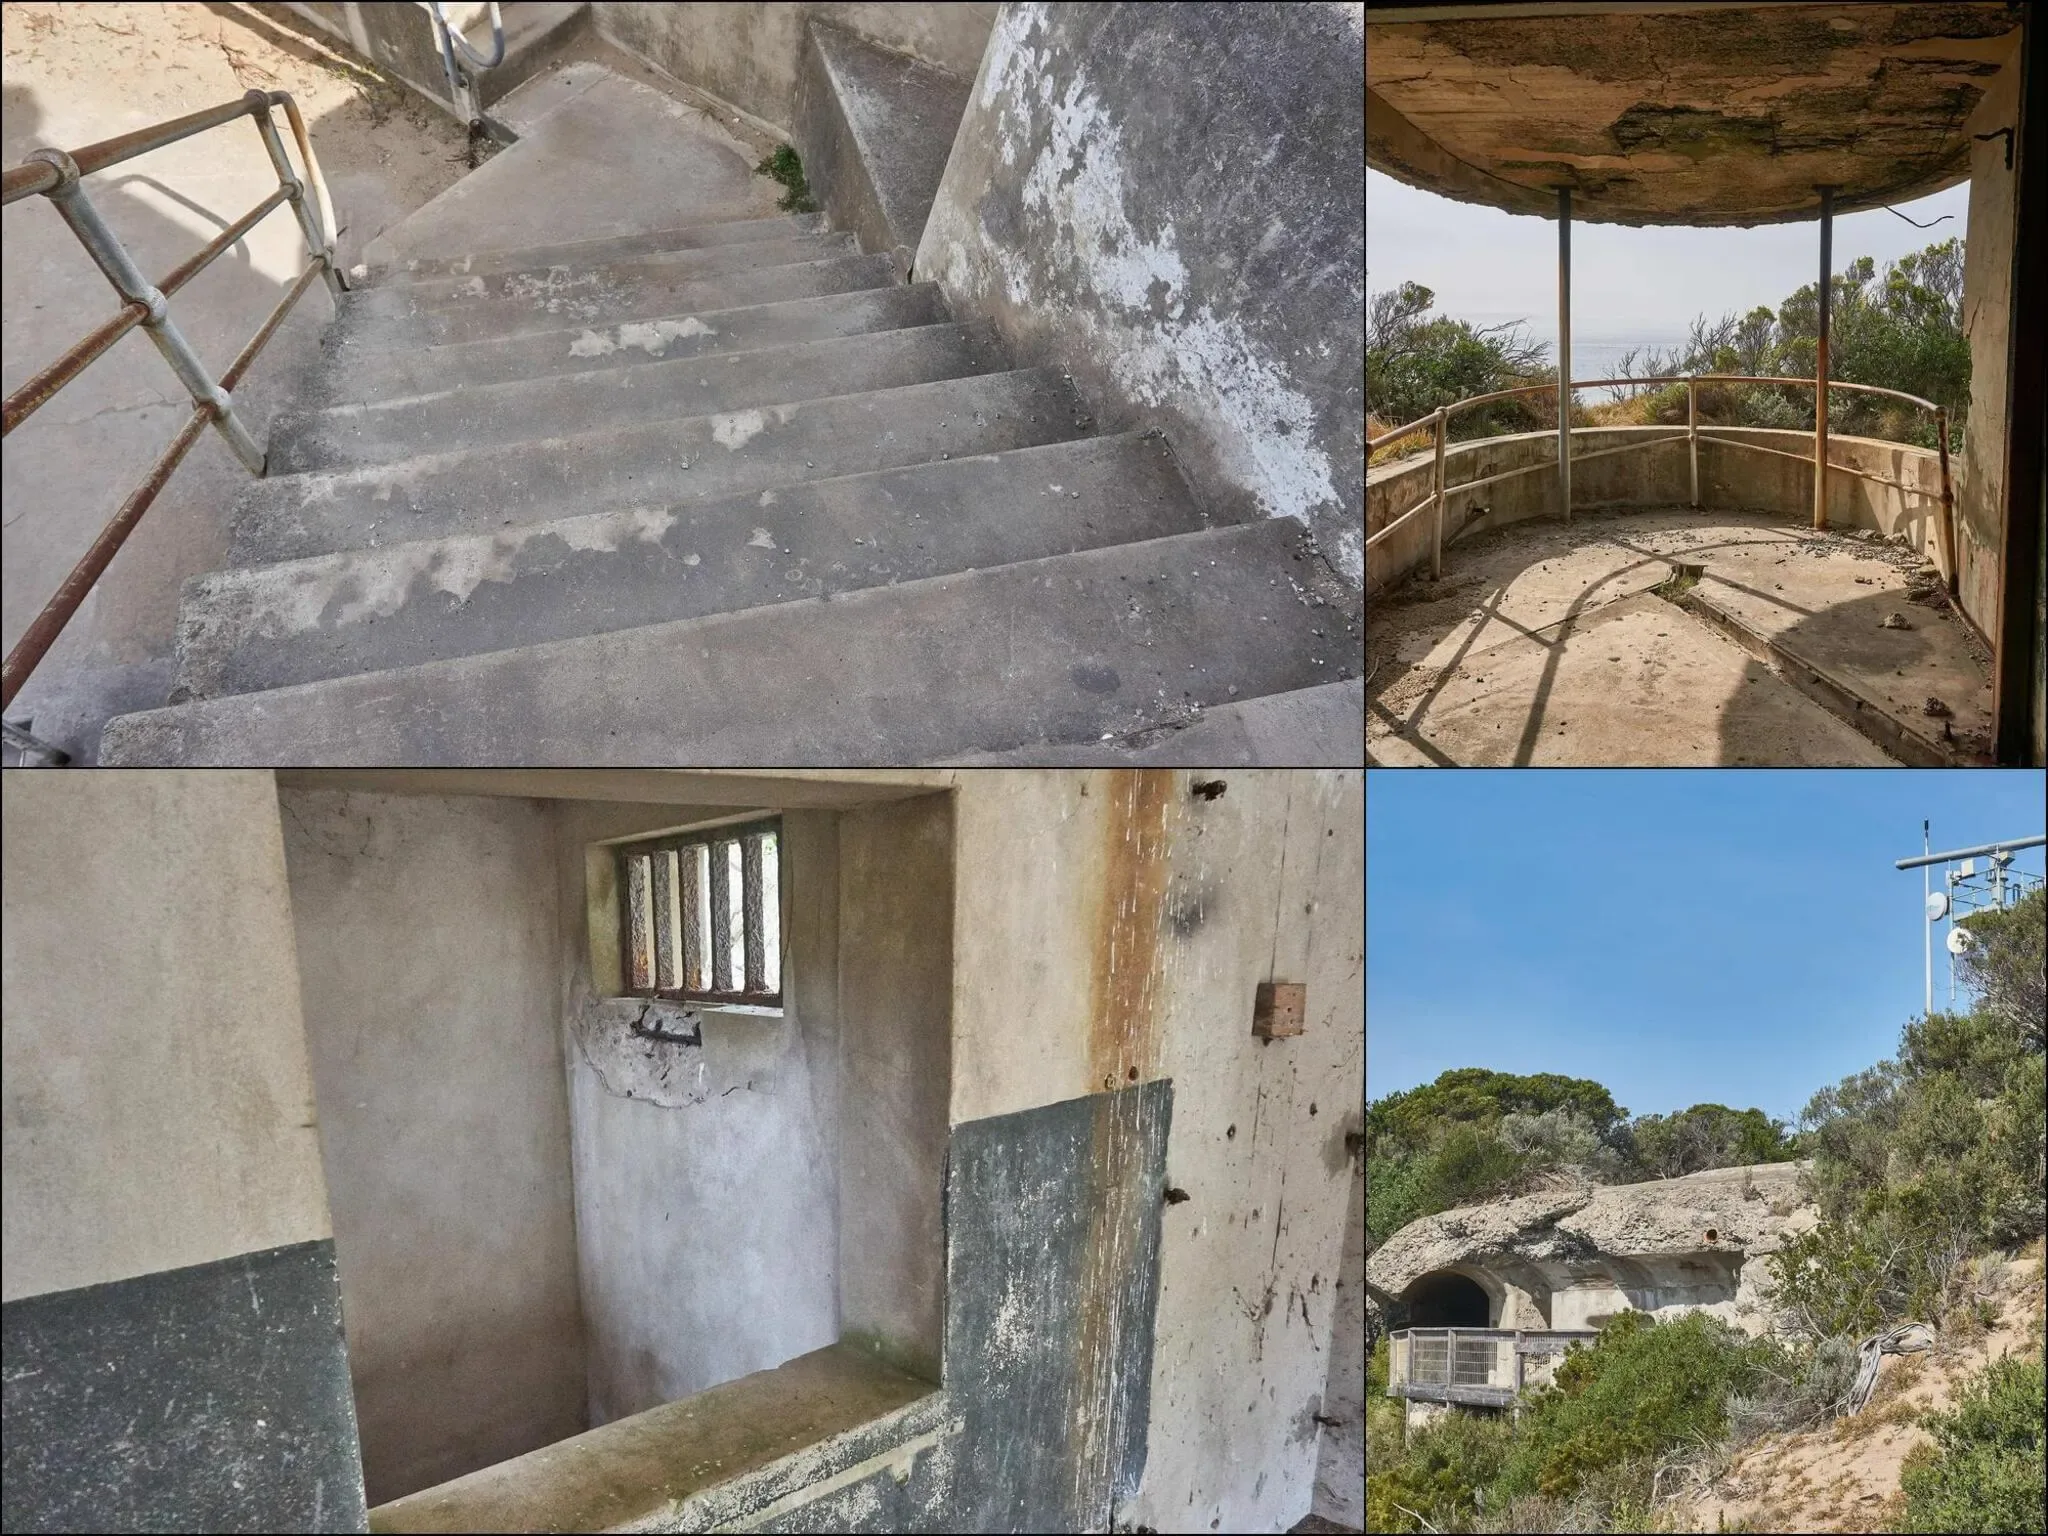 420 photos of Deserted Military Fort